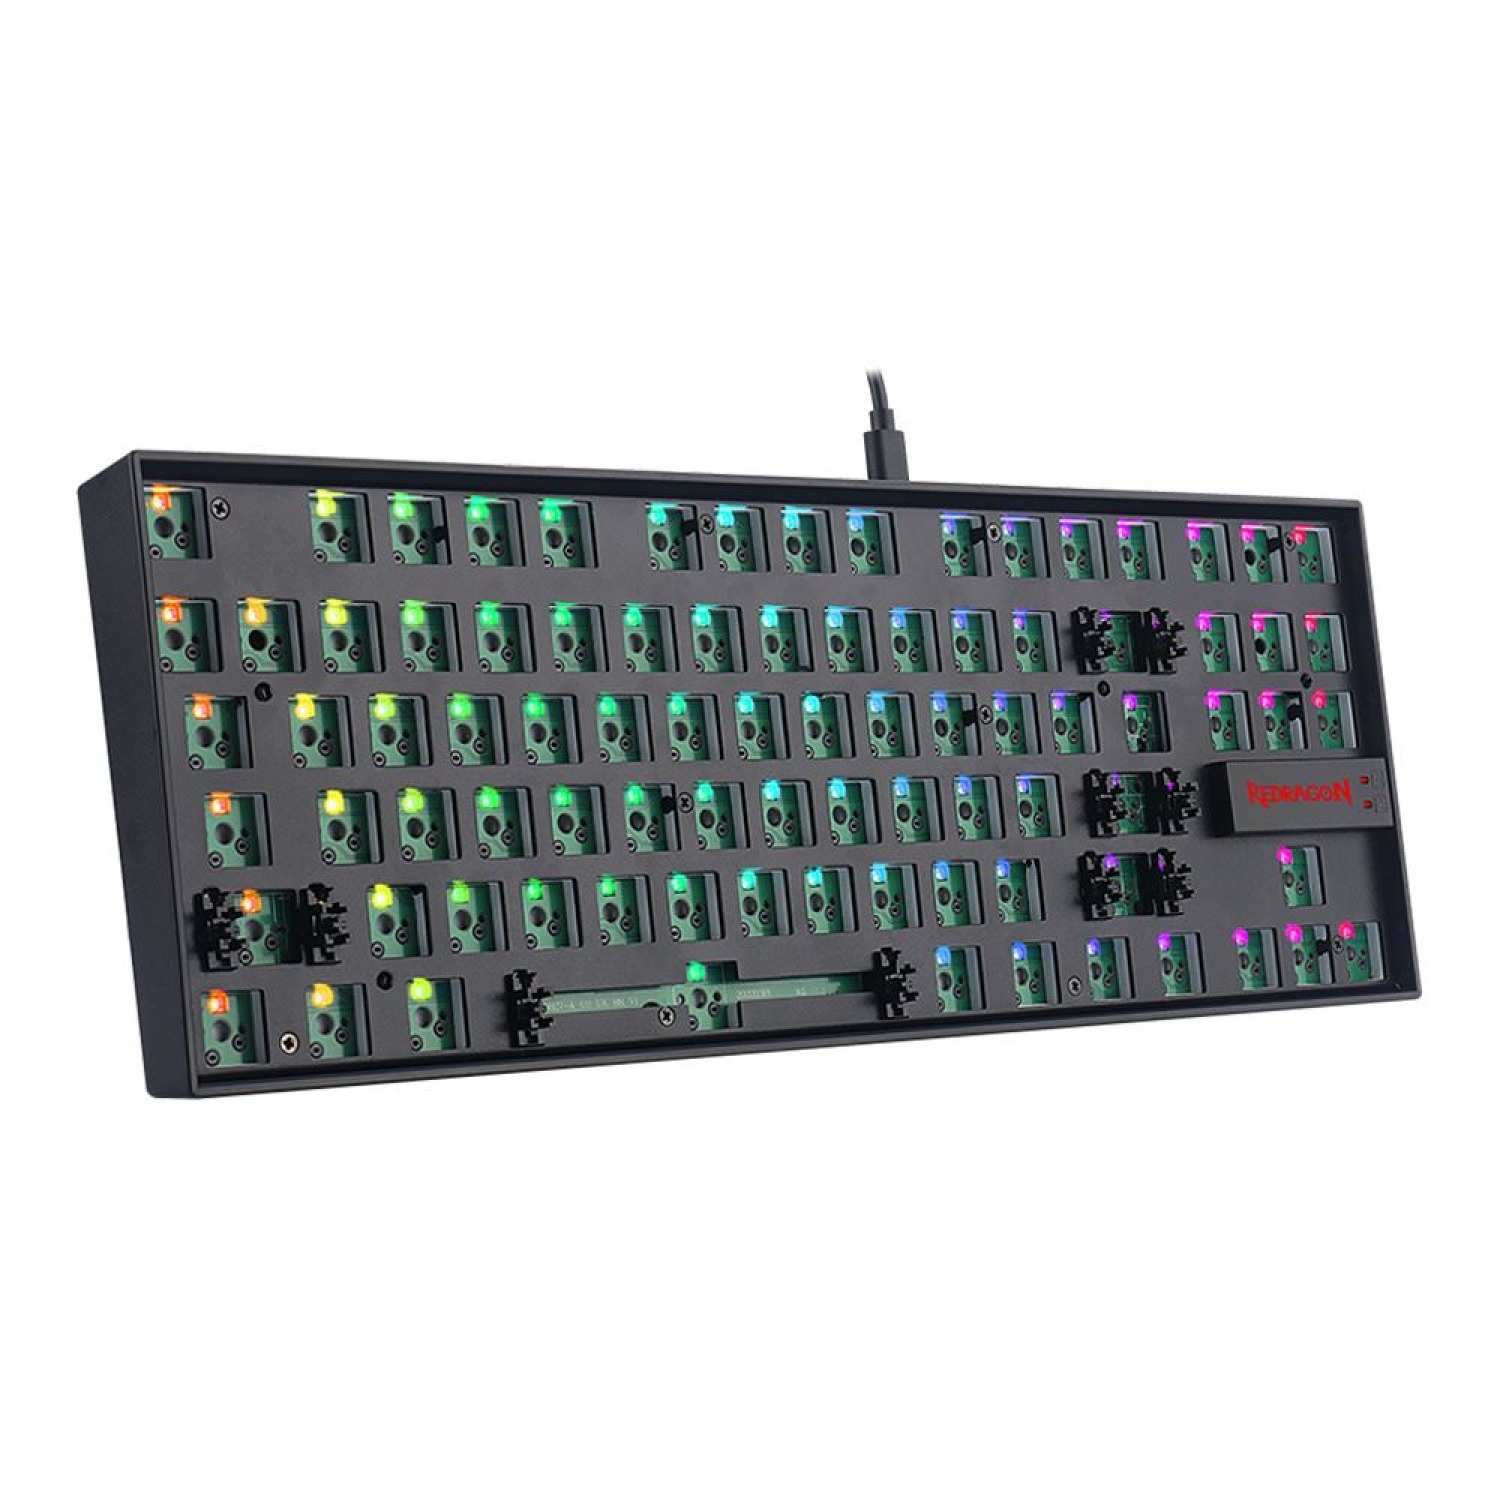 Micro Center Stores: Redragon DIY Mechanical RGB Keyboards & Accessories, Starting at $39.99 - In Store Only